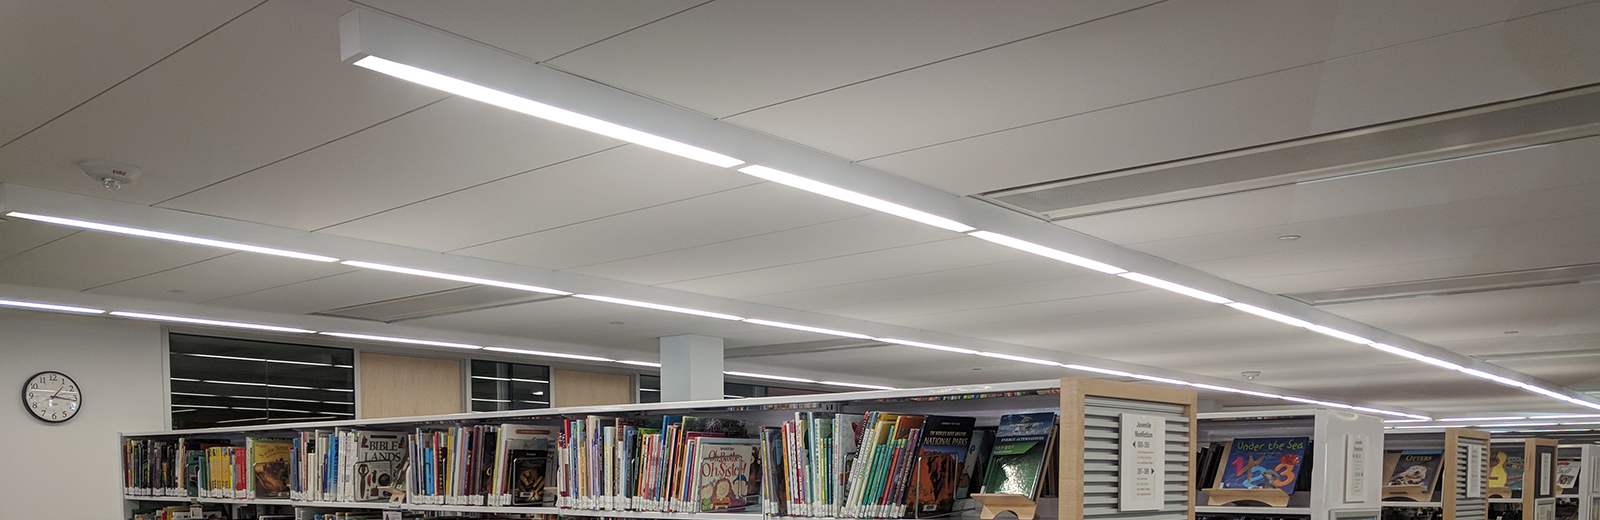 LED lighting in the library